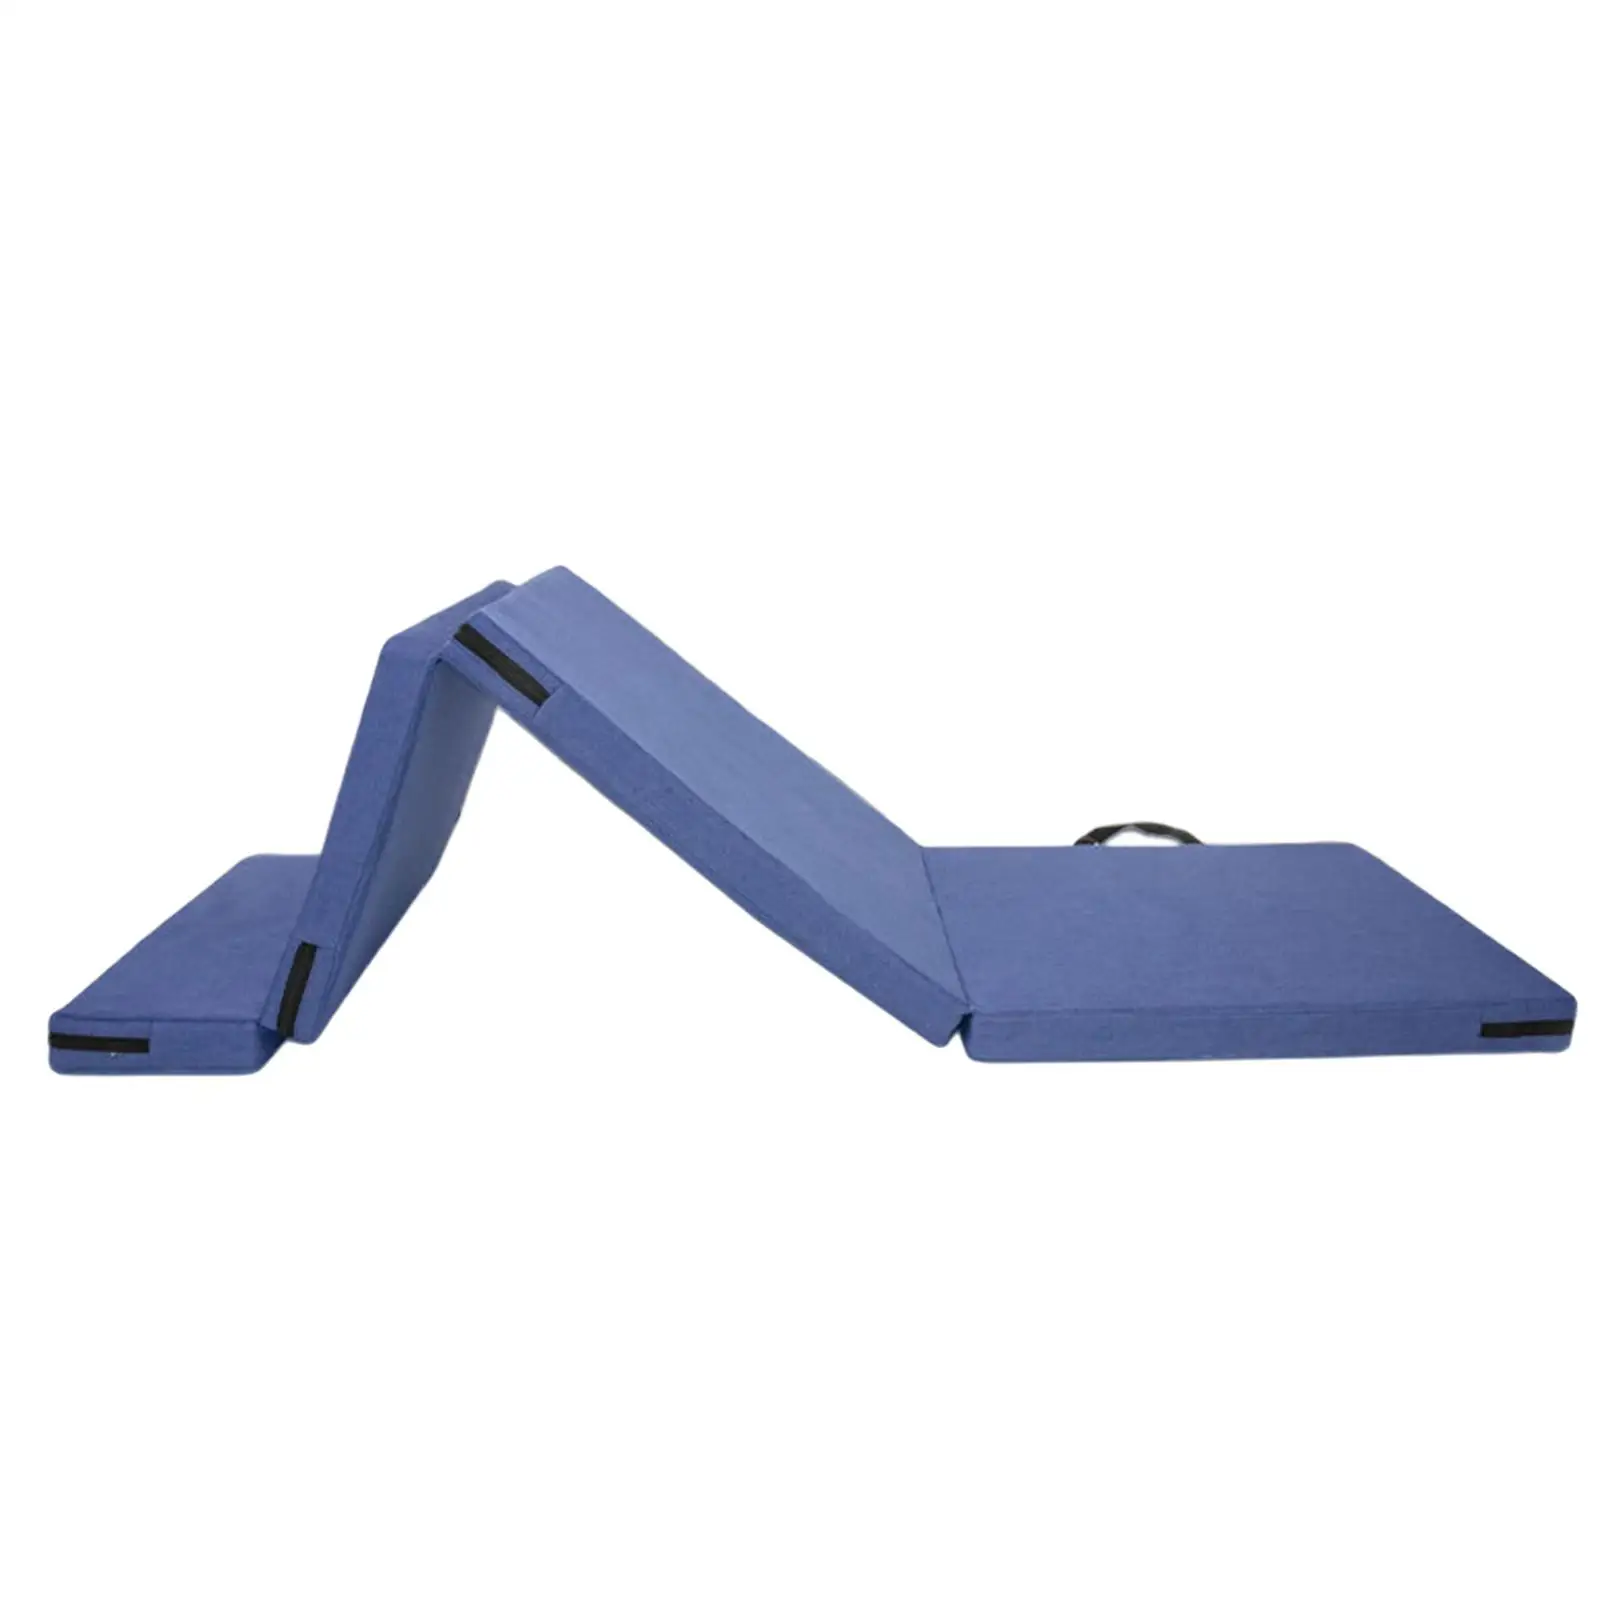 Folding Thick Exercise Mat Non Slip with Carrying Handles Gymnastics Mats for Pilates Training Stretching